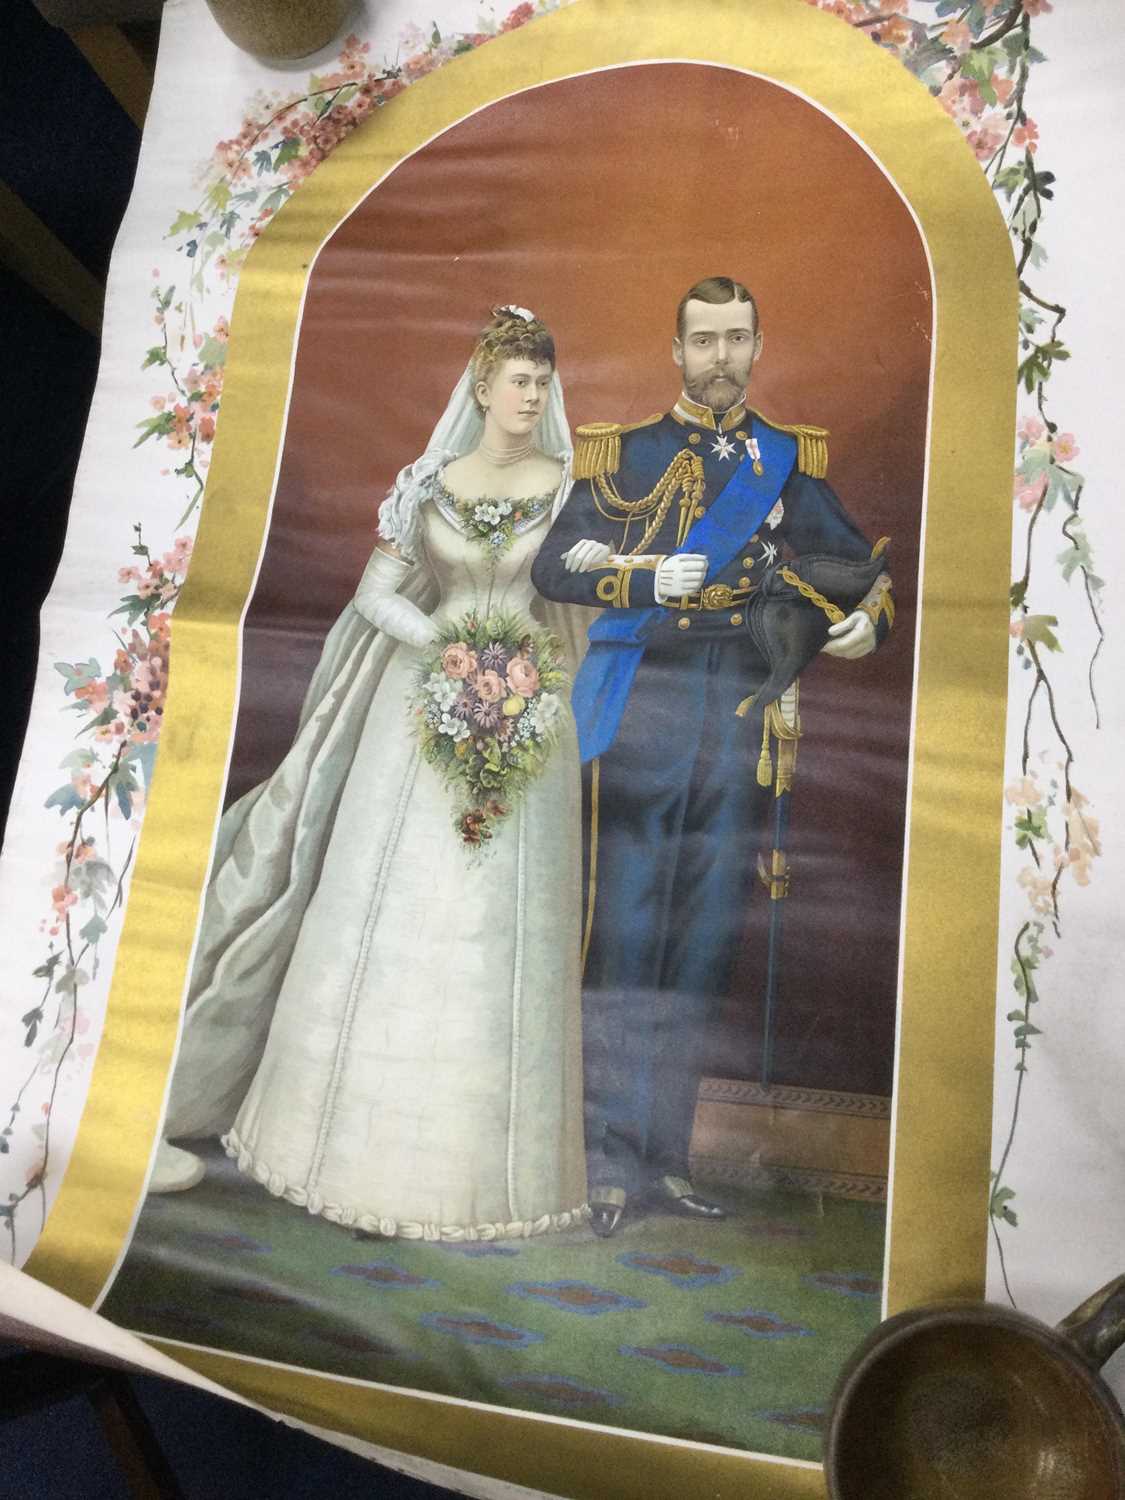 Lot 203 - A PRINT OF TH PRINCESS VICTORIA MARY AND THE DUKE OF YORK